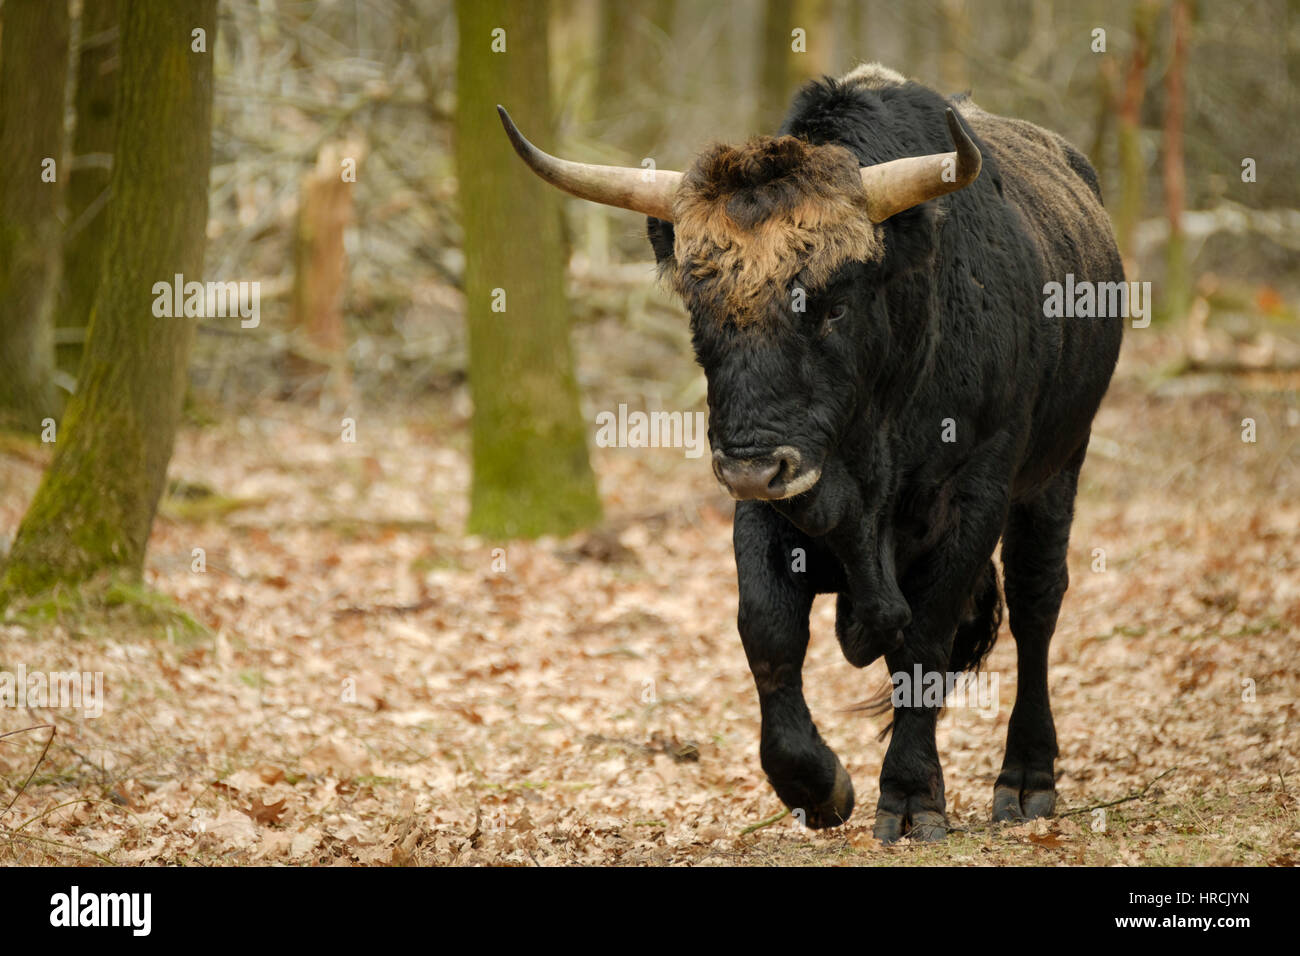 Aurochs animal Bos primigenius with large horns Stock Photo